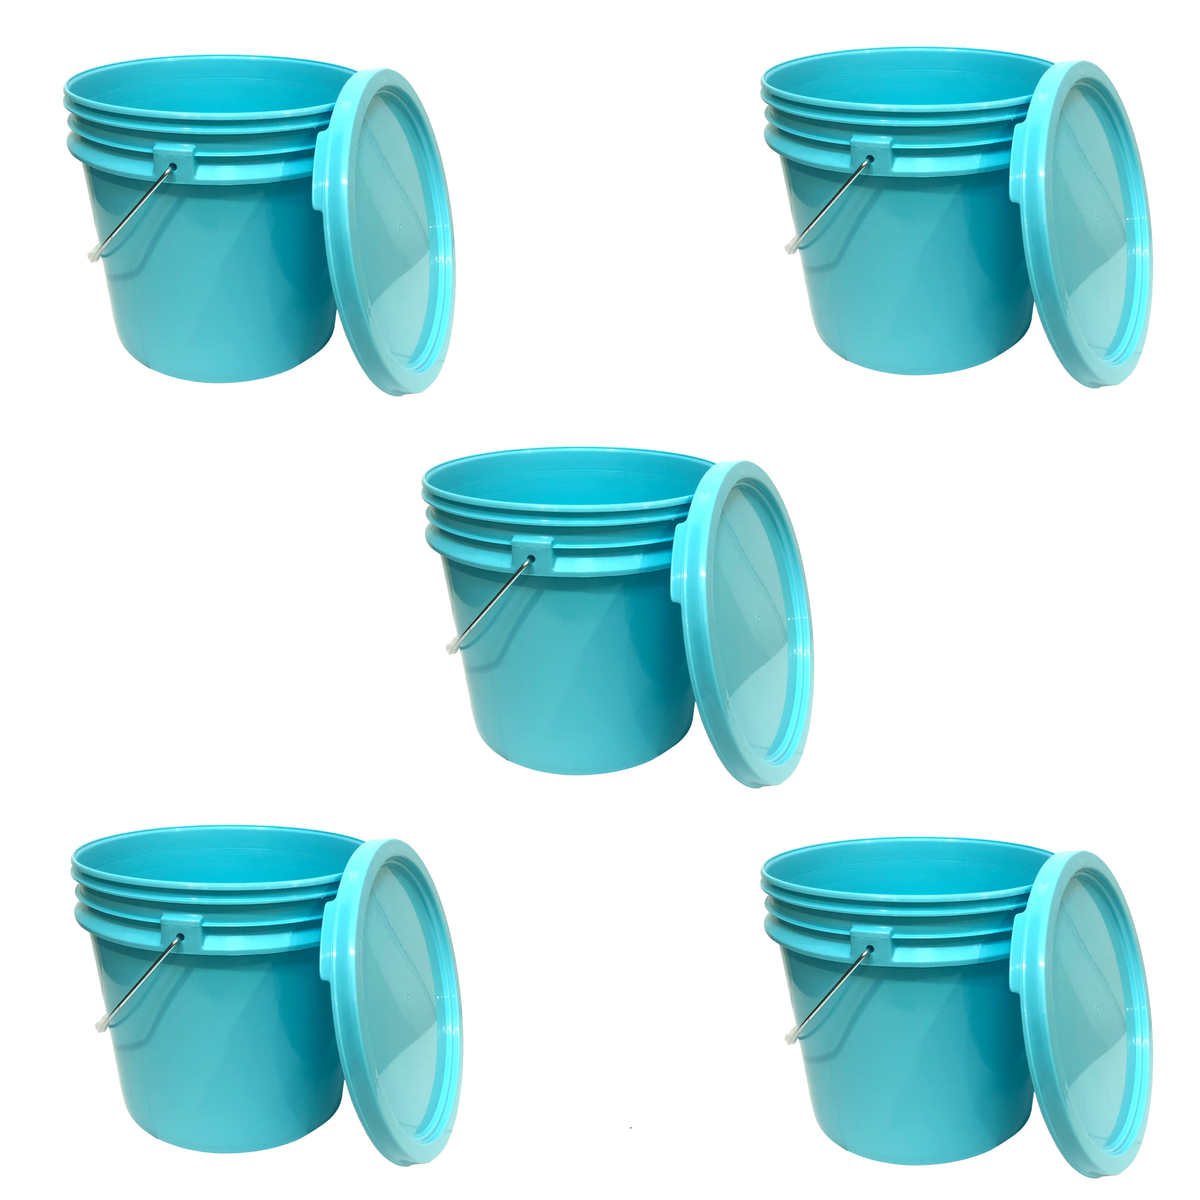 Outdoor 5 Gallon Bucket with Lid - Durable All Purpose Pail (Aqua, 1)